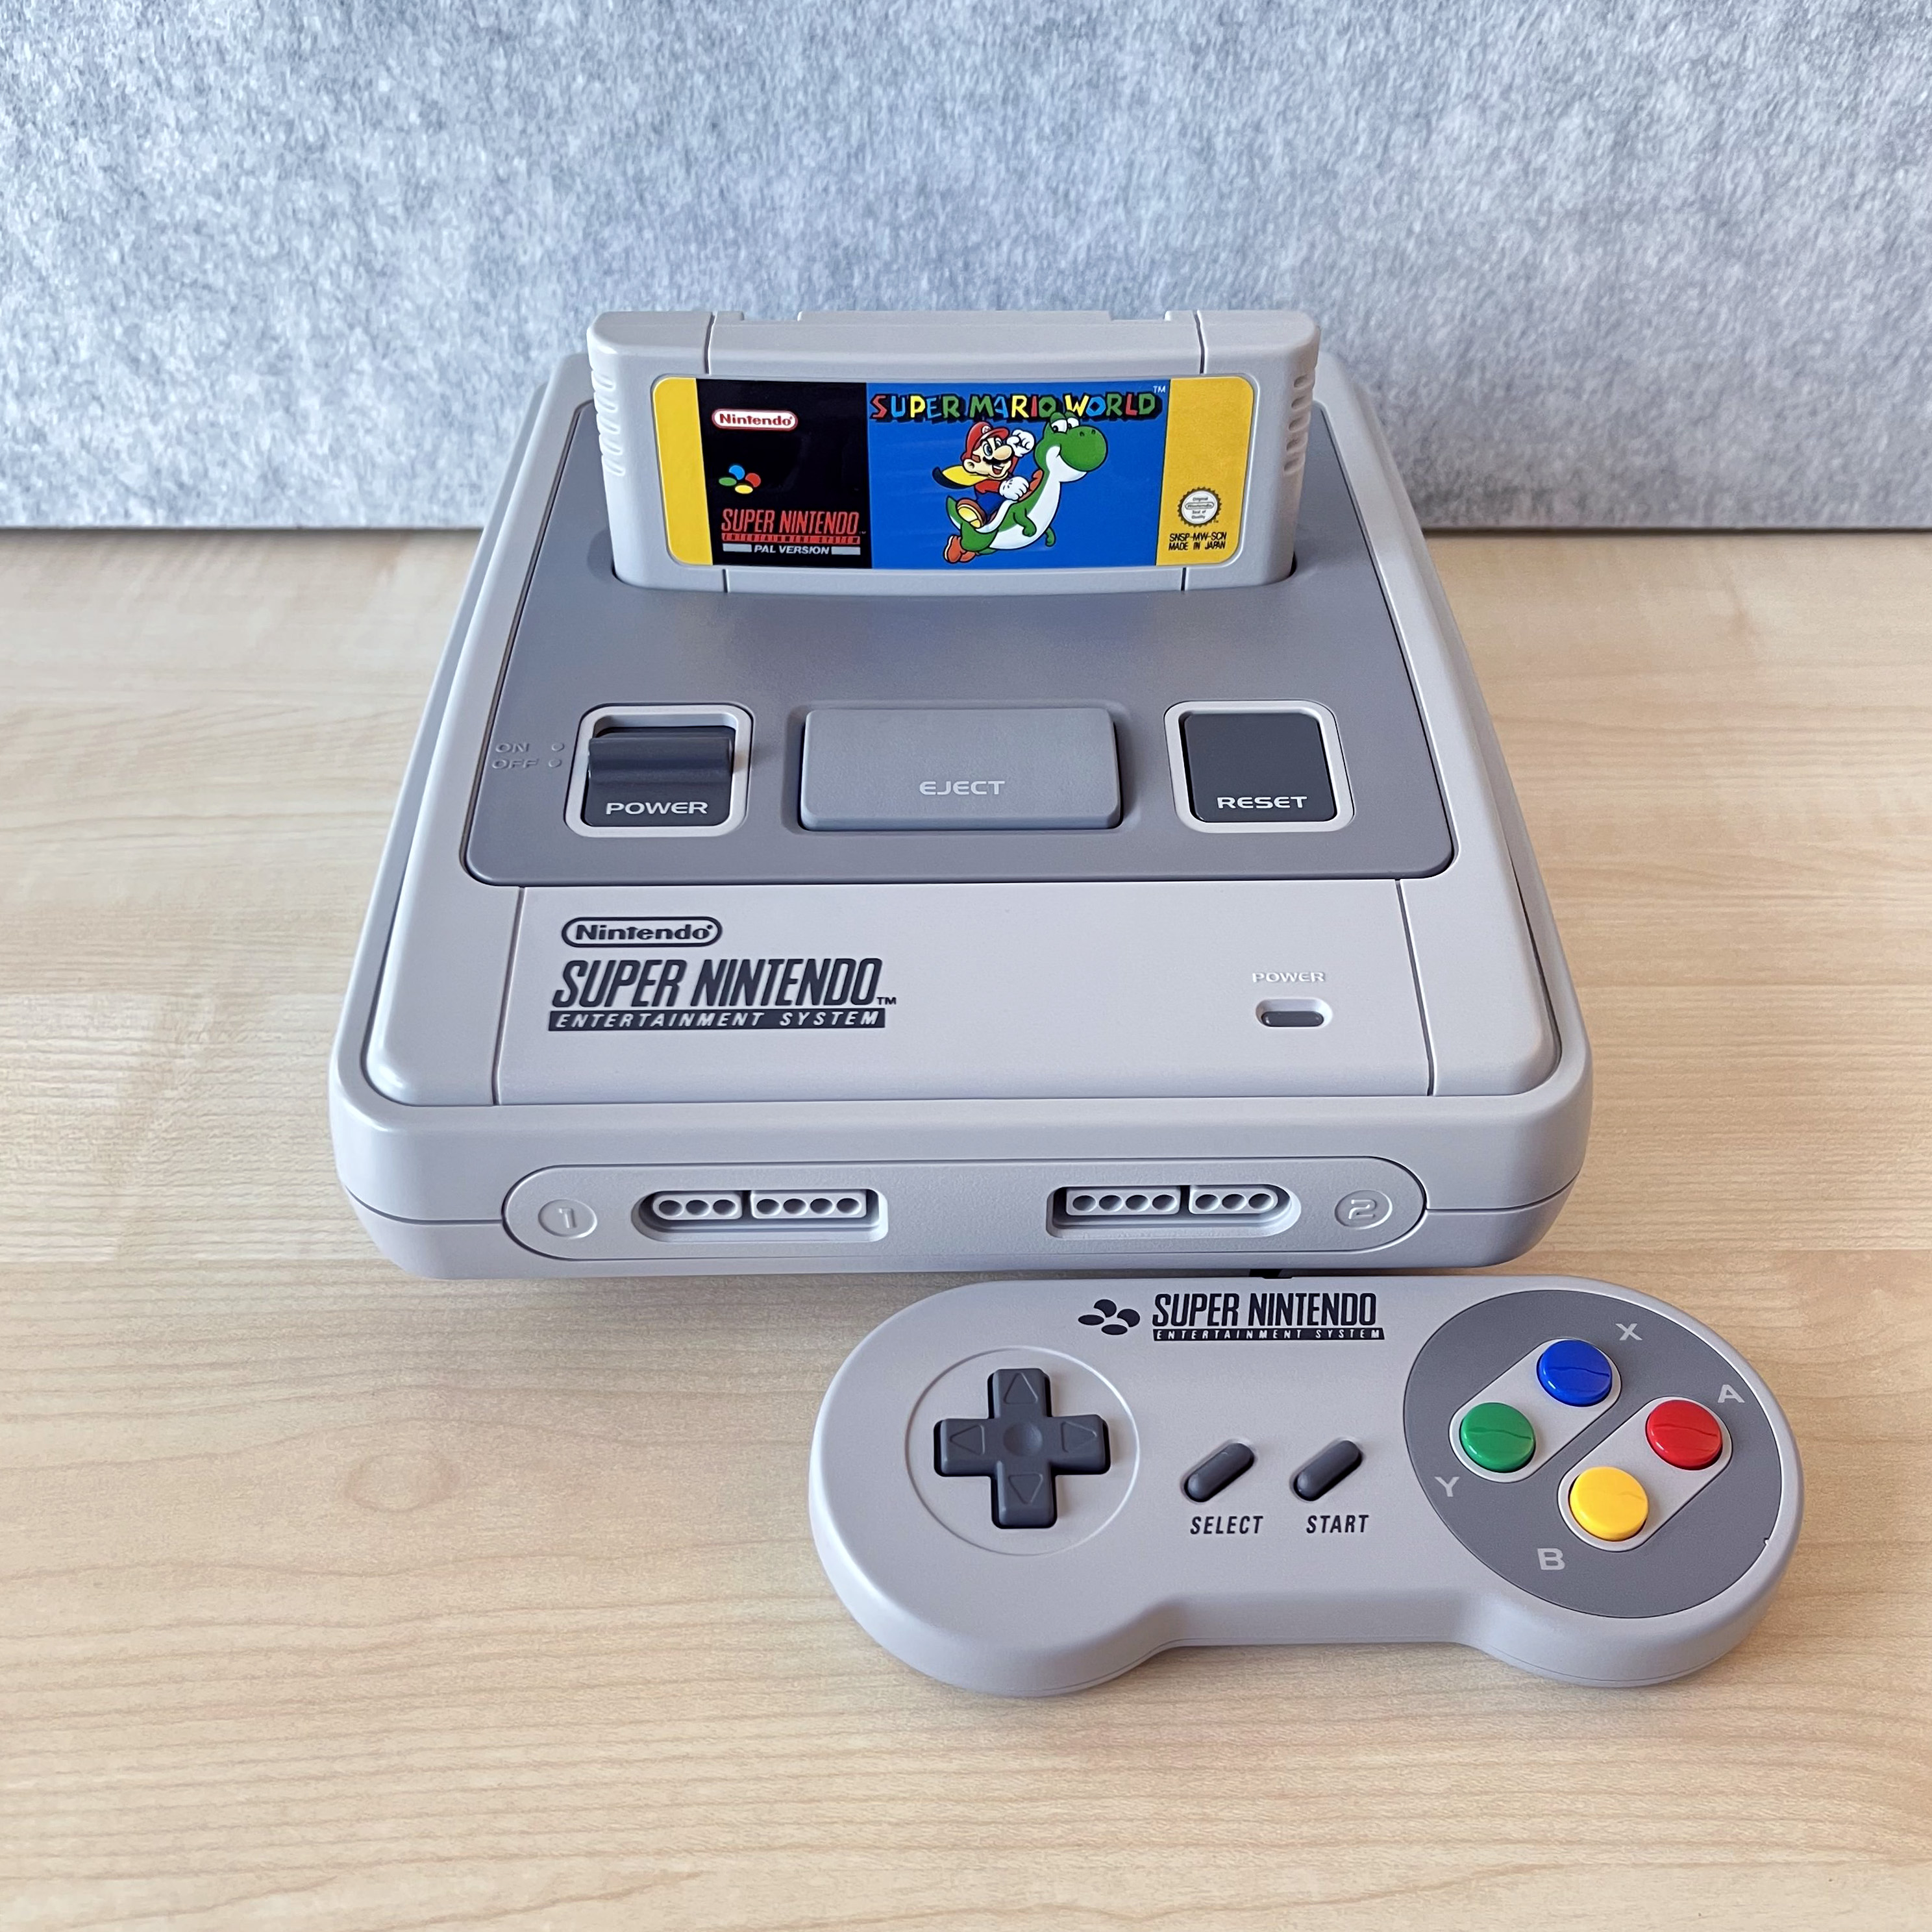 Nintendo of Europe on Twitter: "The 16-bit console #SuperNES first arrived  in Europe 30 years ago today alongside Super Mario World! What's your  favourite Super NES game? https://t.co/mSxuNXuzR7" / Twitter